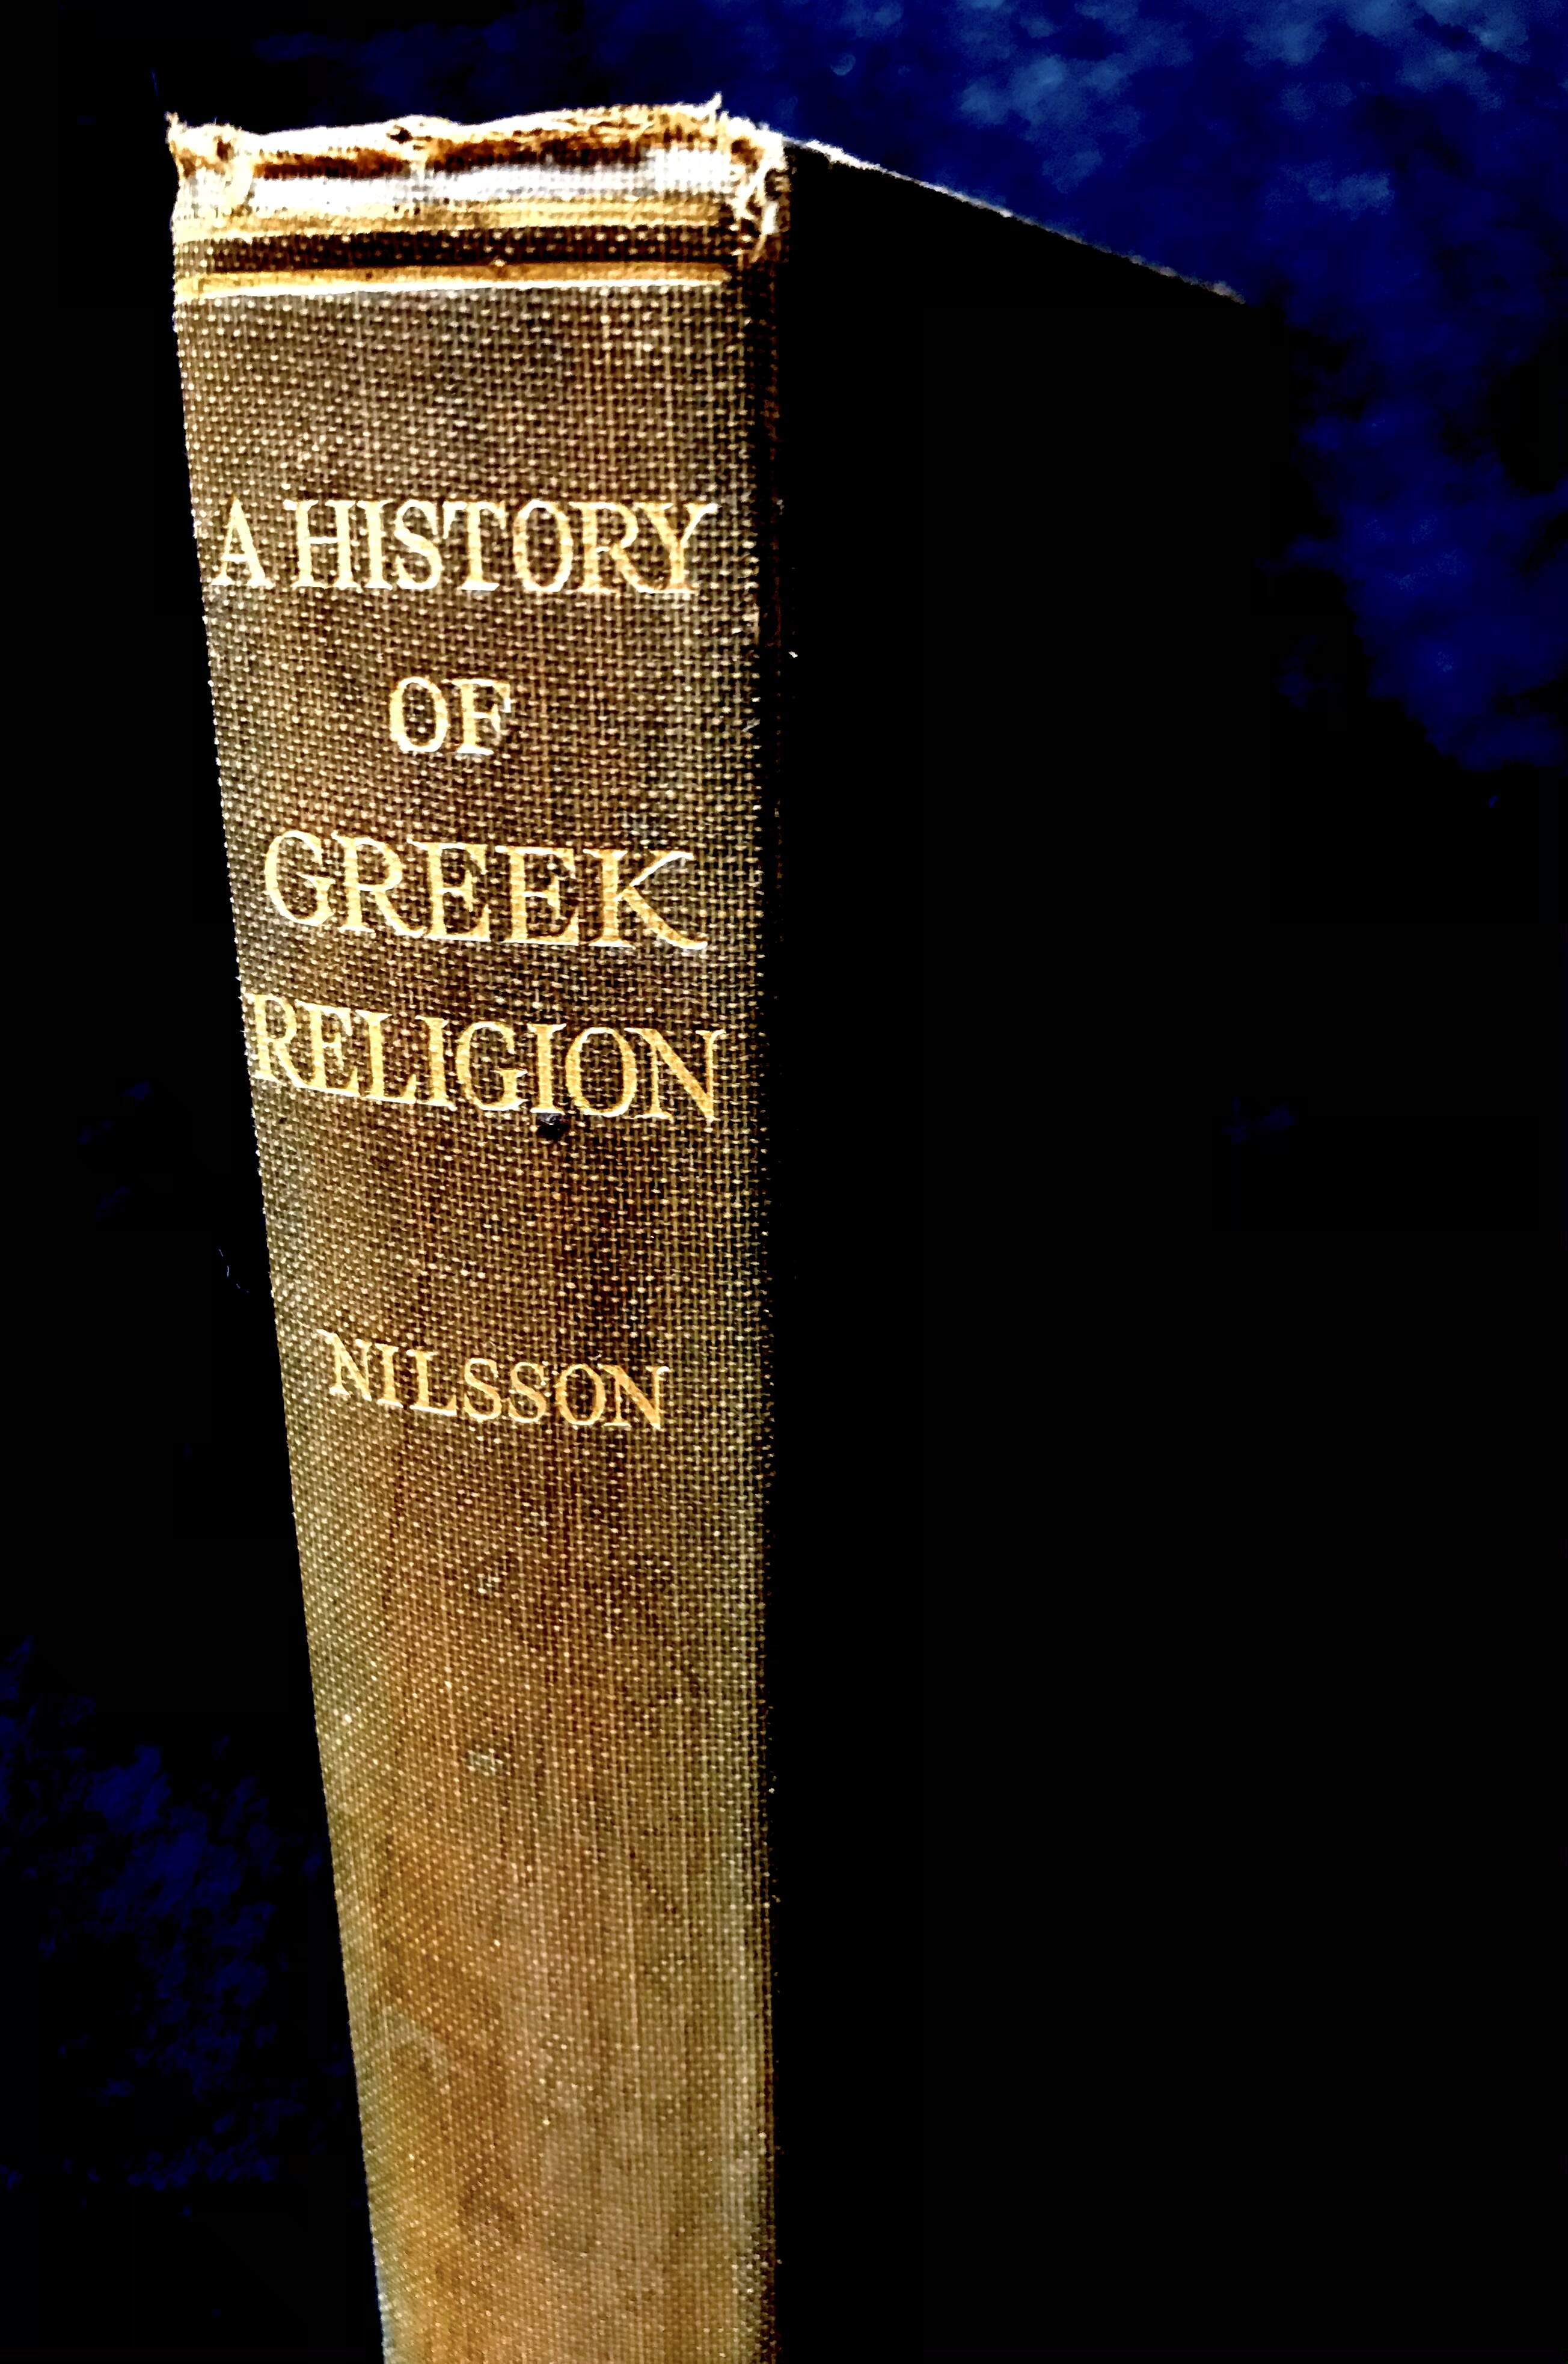 A History of Greek Religion by Martin P. Nilsson